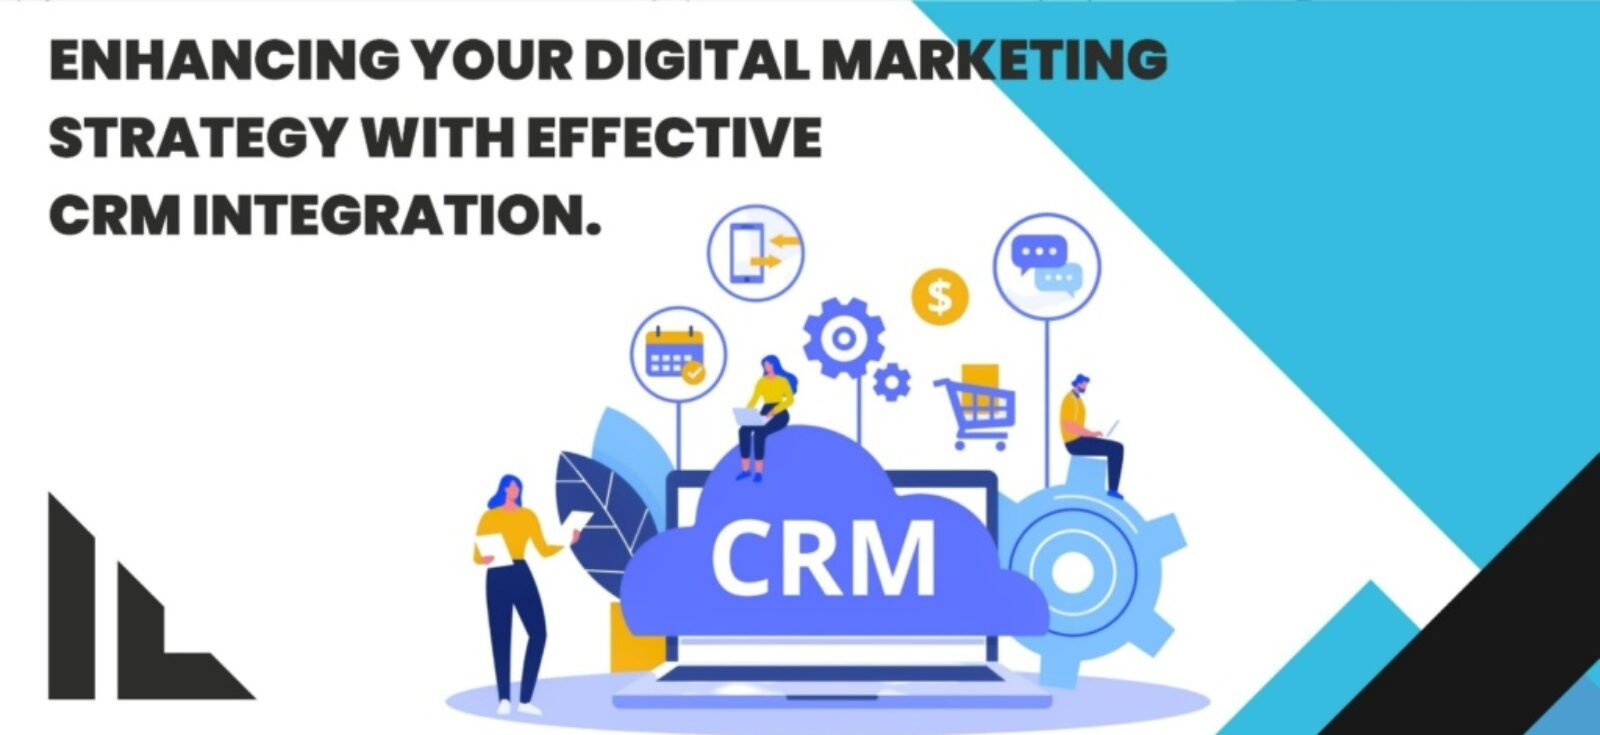 Enhancing Your Digital Marketing Strategy with Effective CRM Integration